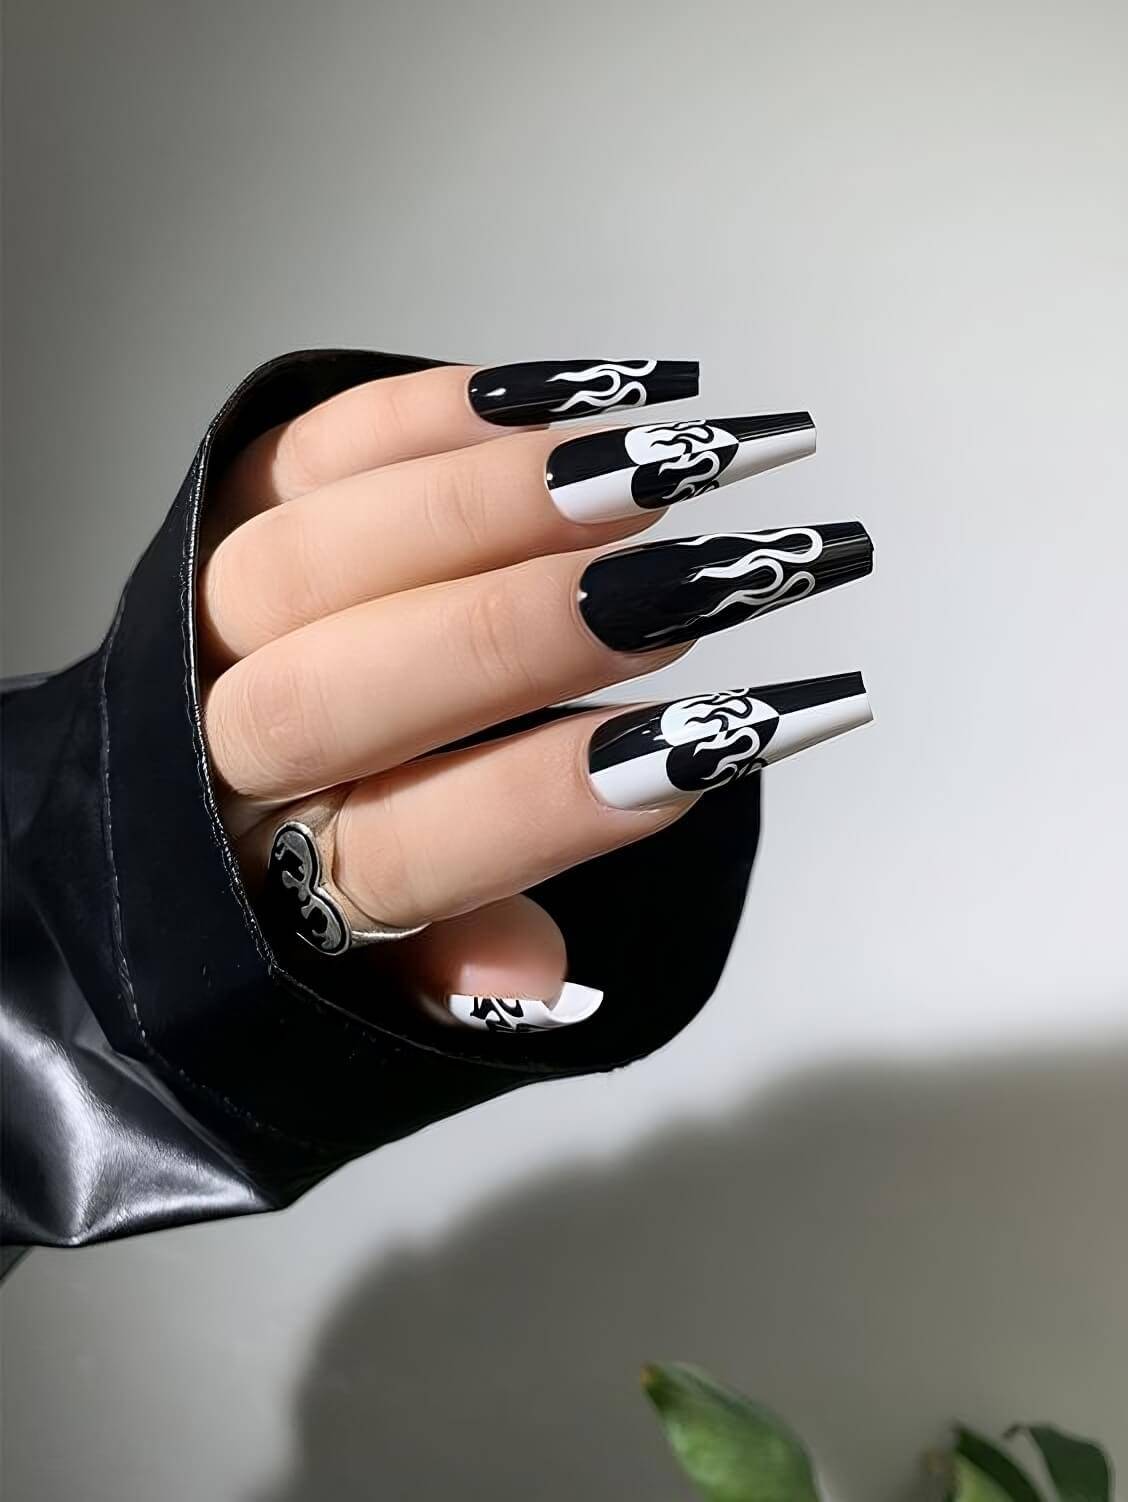 30 Classy Black Nail Designs To Glam You Up - 215